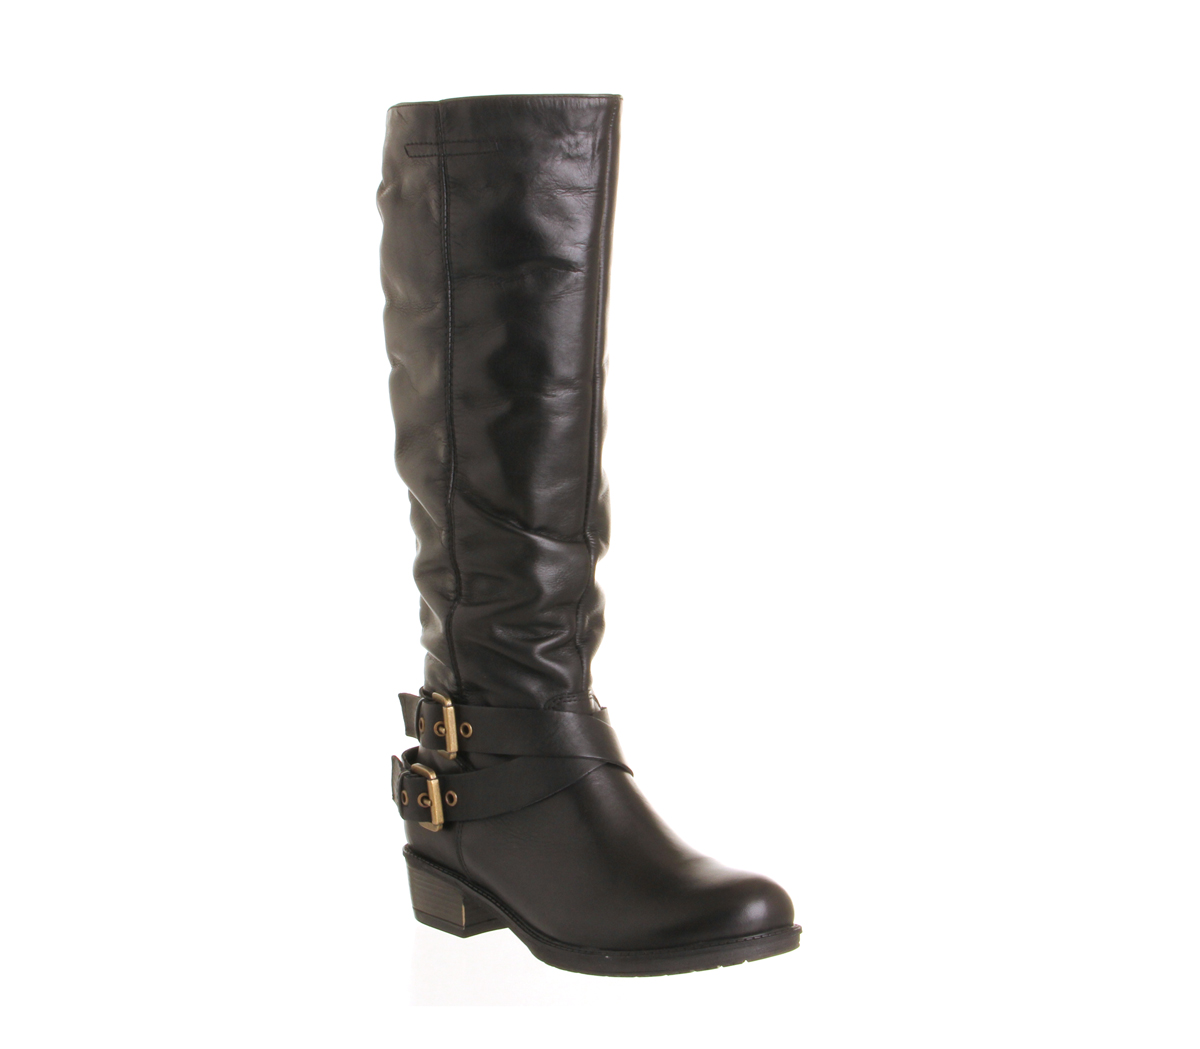 OFFICENifty Buckle Knee bootsBlack Leather